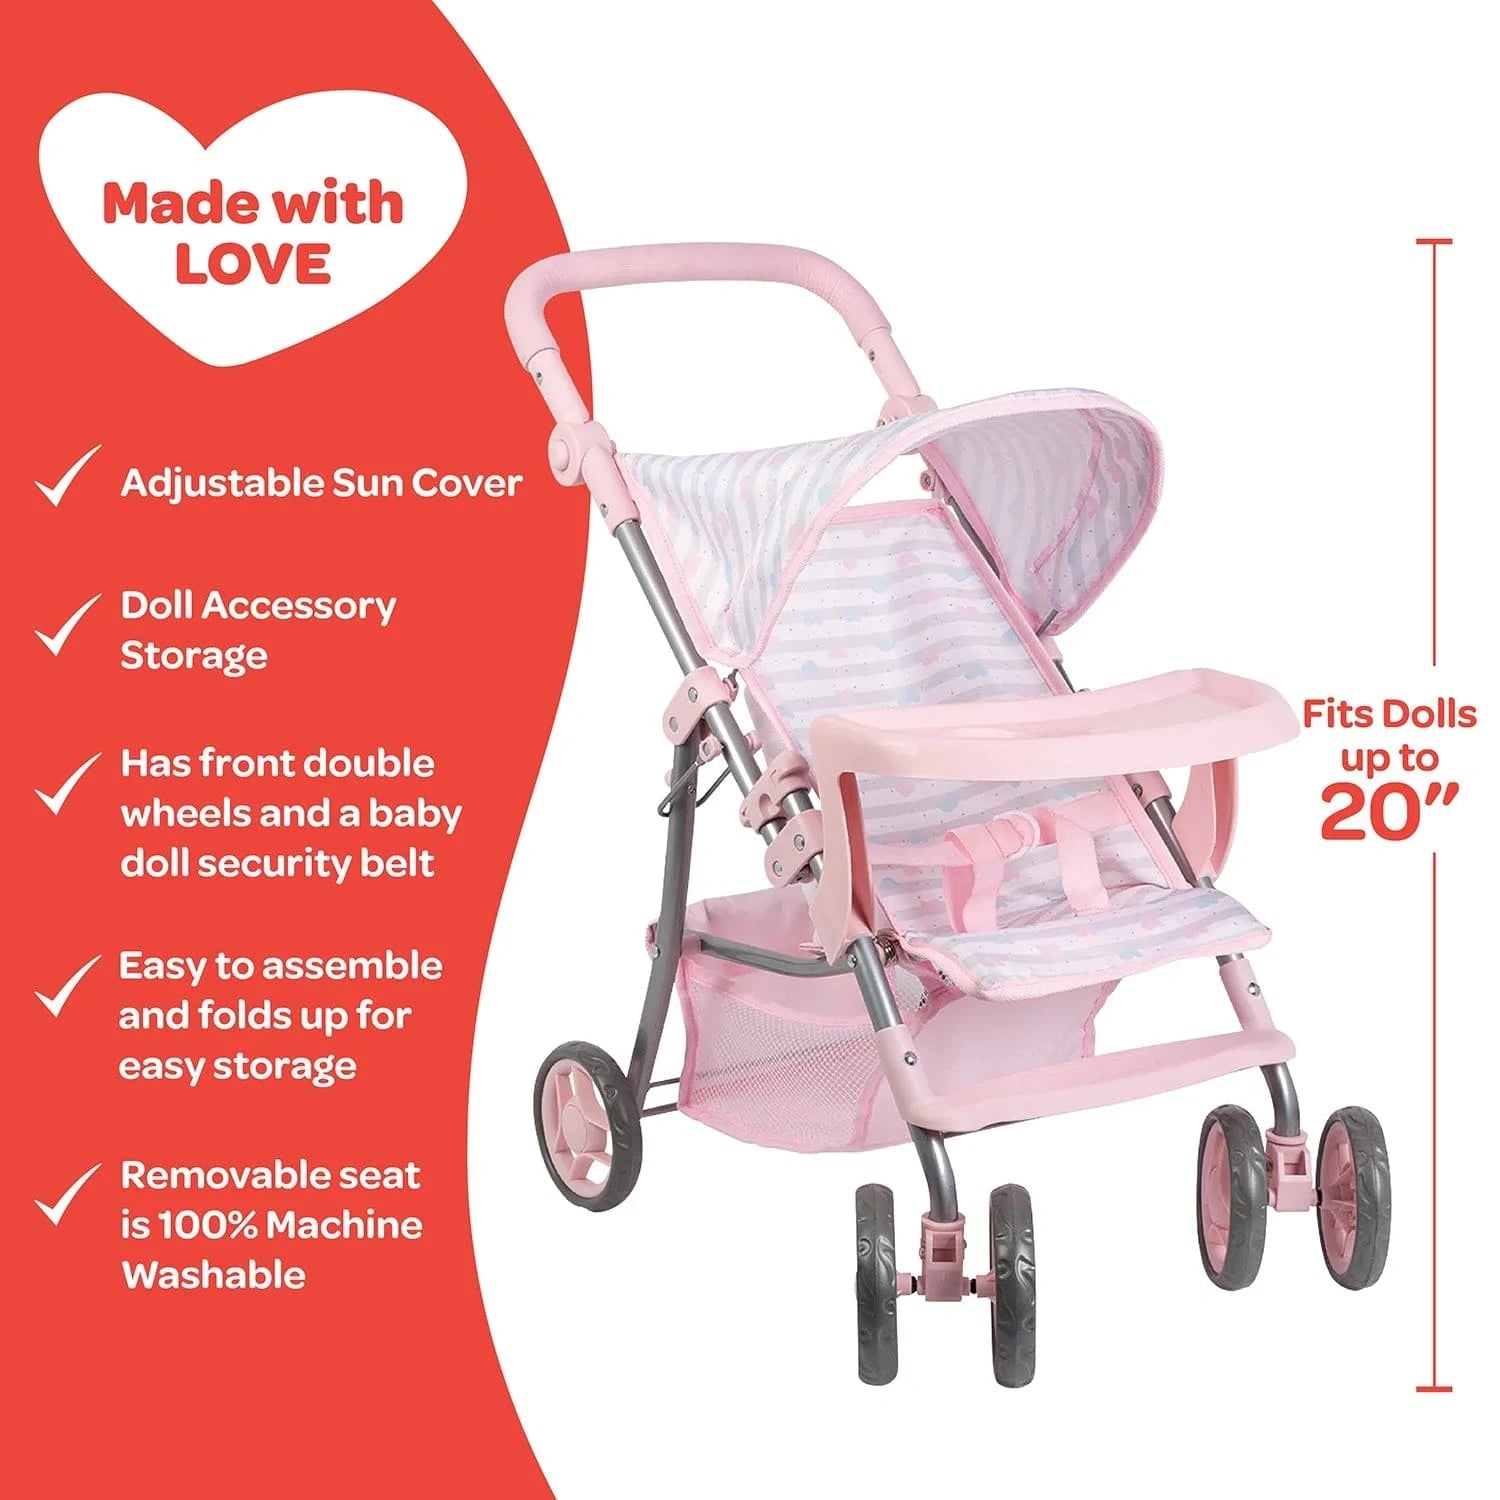 Adora Rainbow Rose Snack and Go Stroller, -- ANB Baby